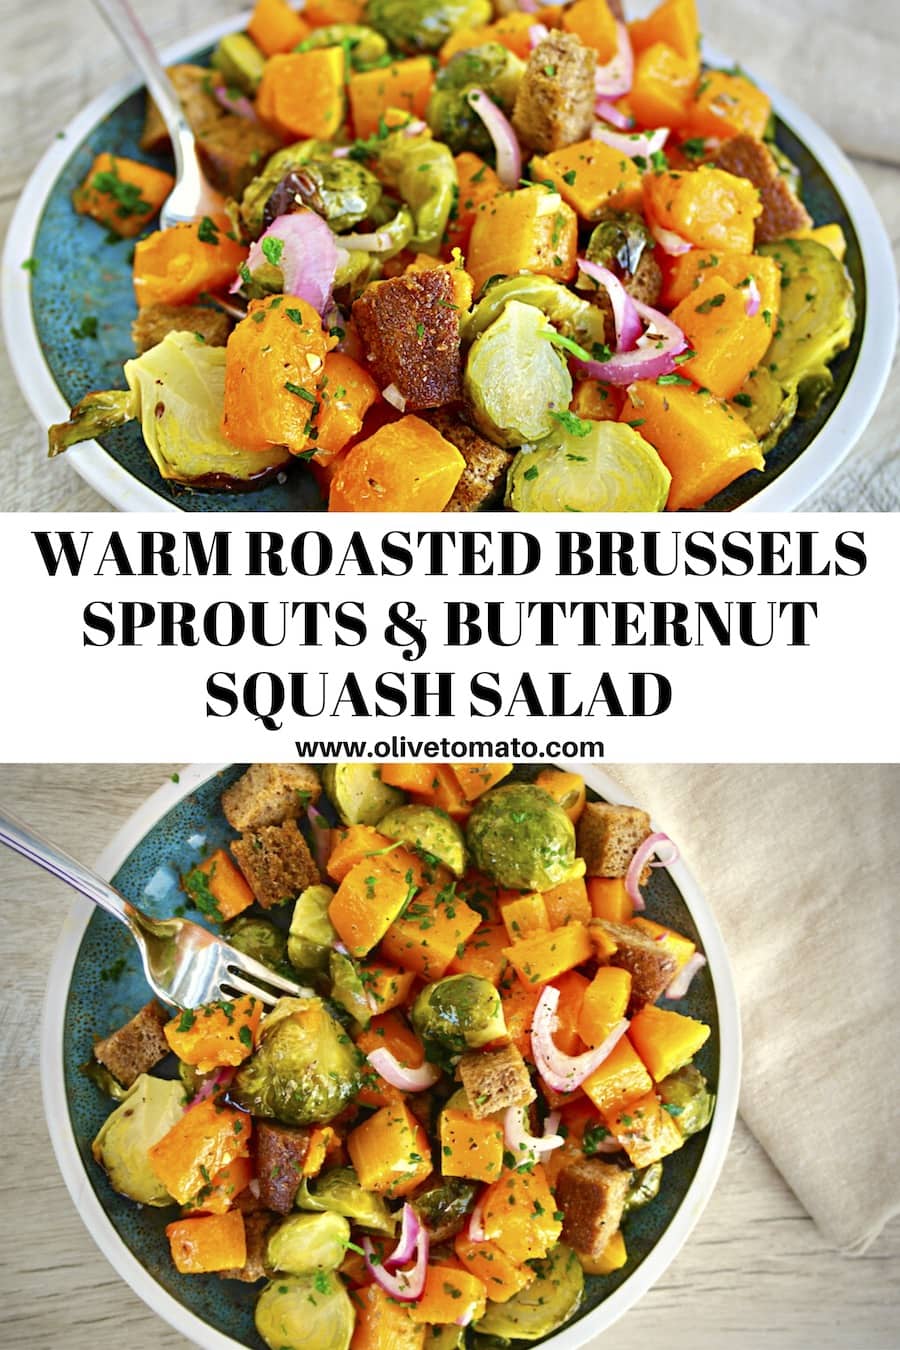 Roasted Brussels Sprouts and Butternut Squash Salad - Olive Tomato